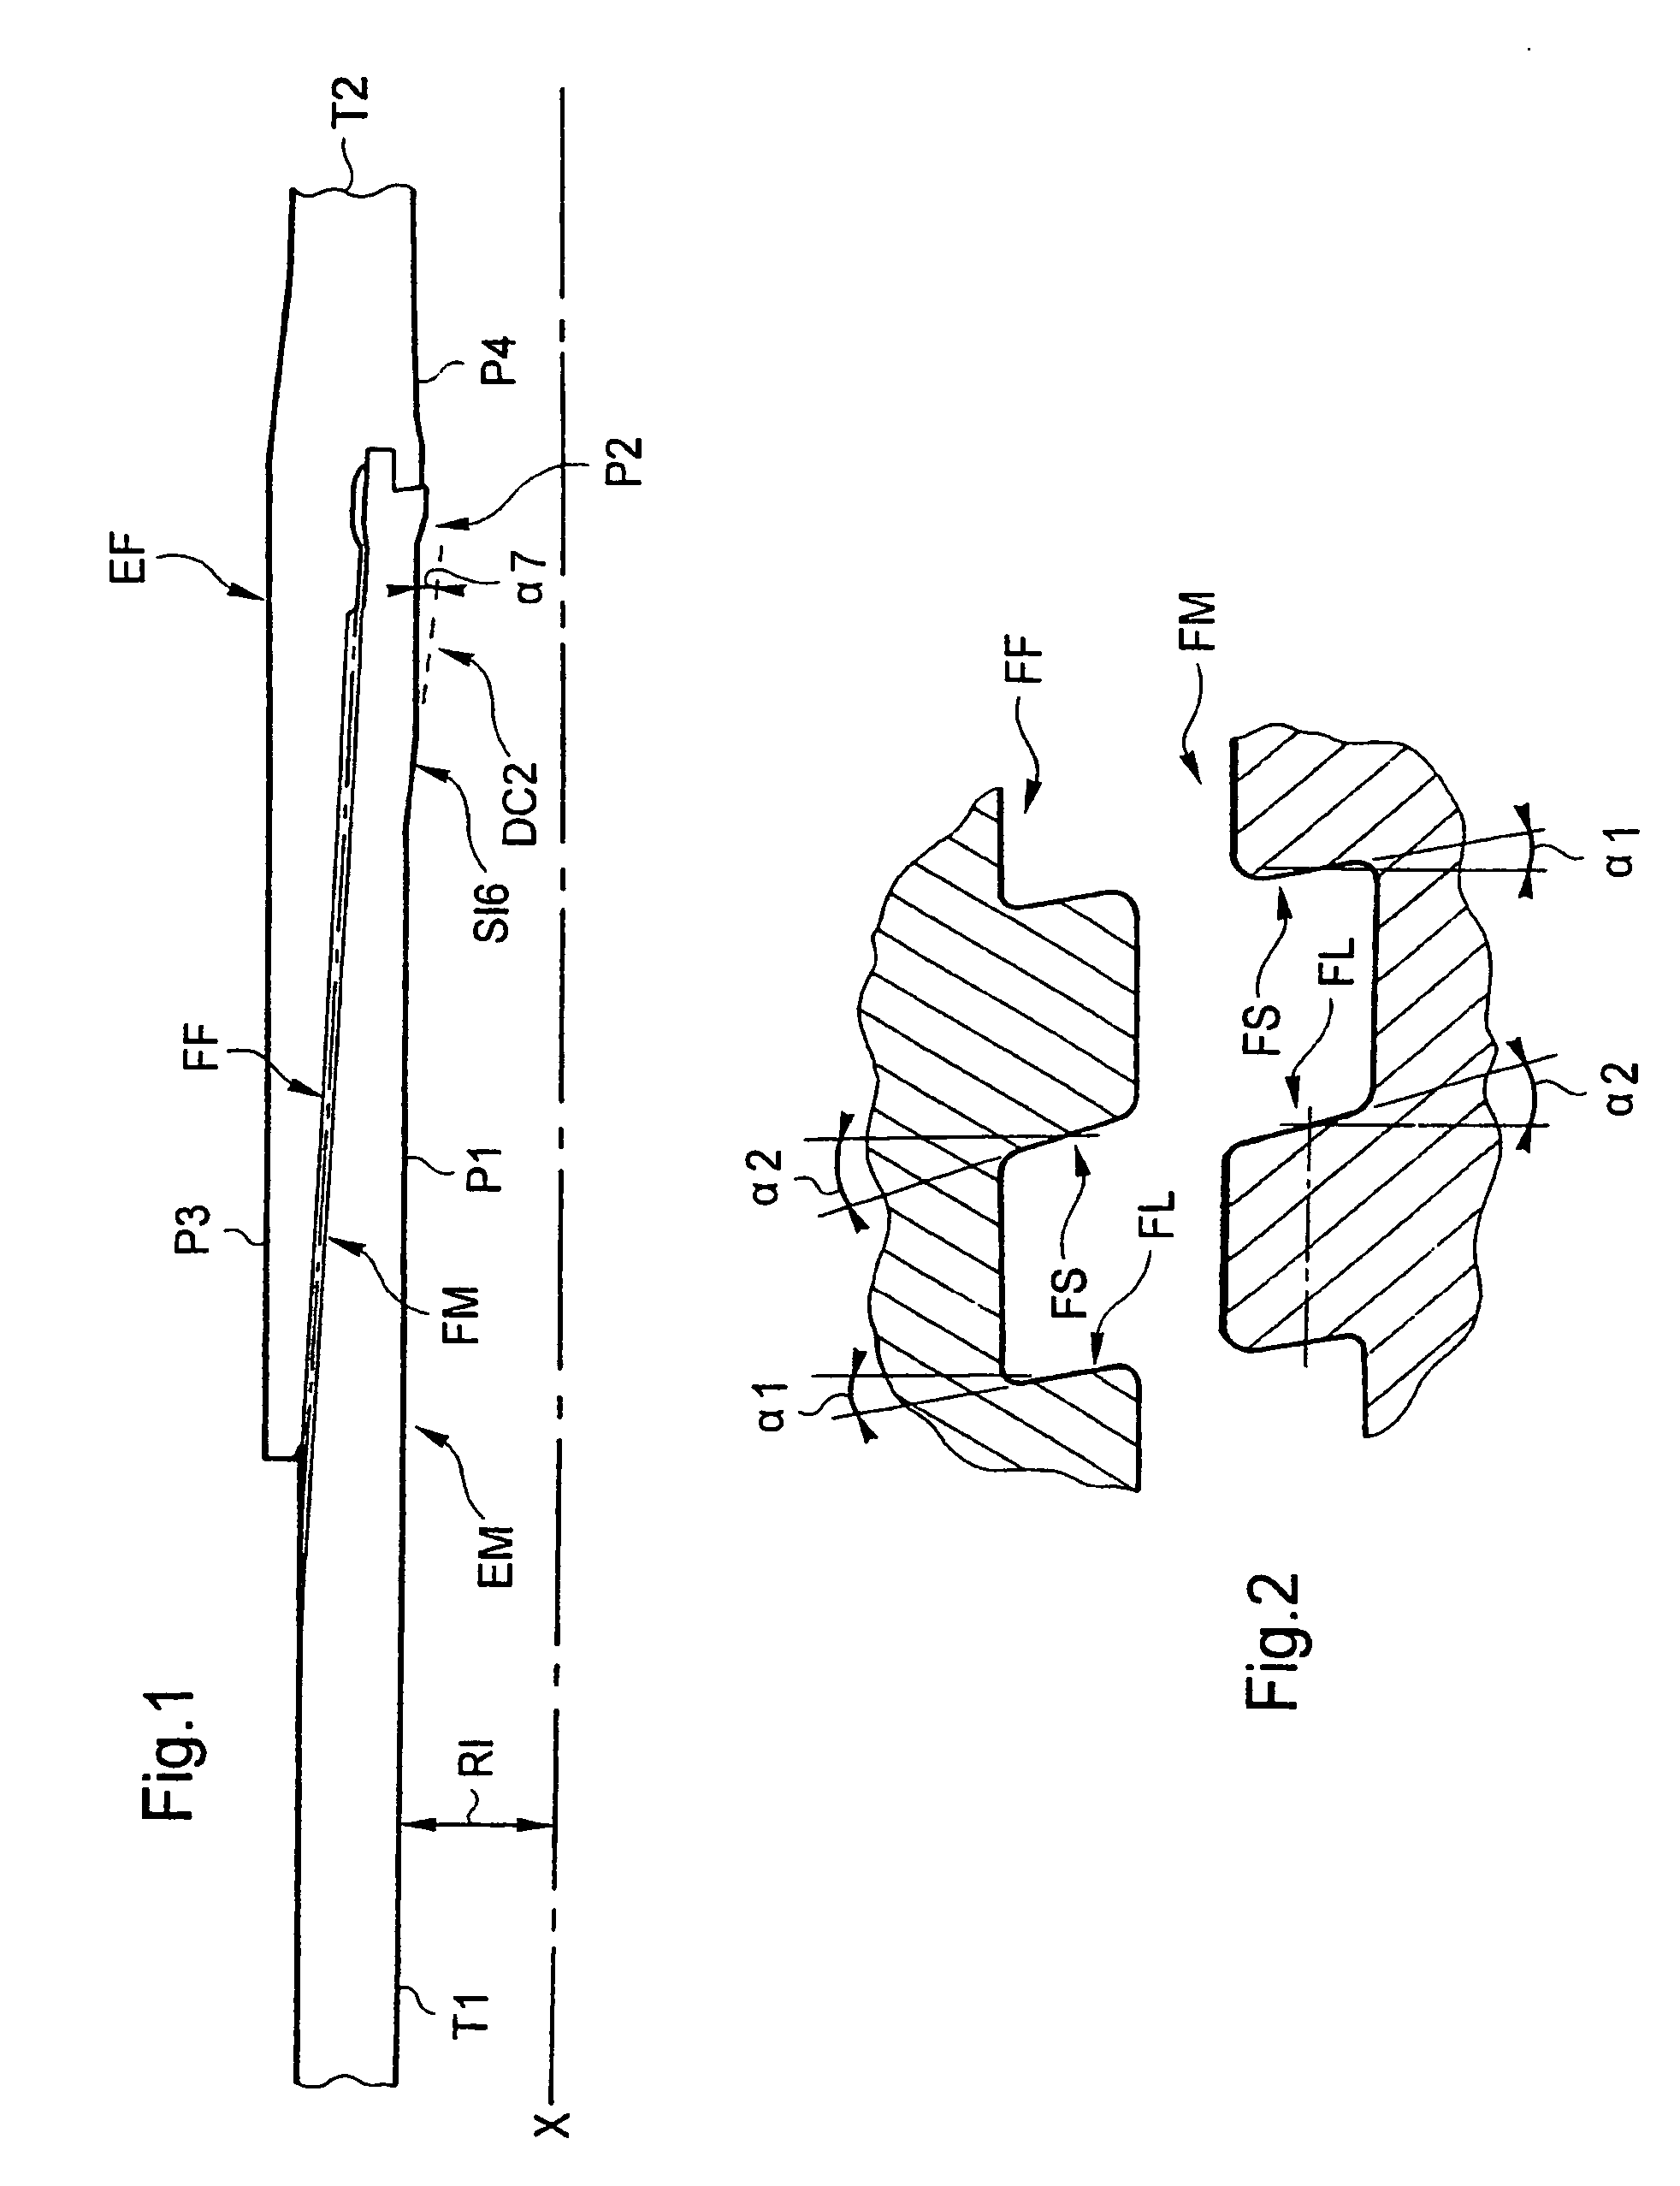 Sealed tubular joint comprising local and initial added thickness(es) by means of plastic expansion